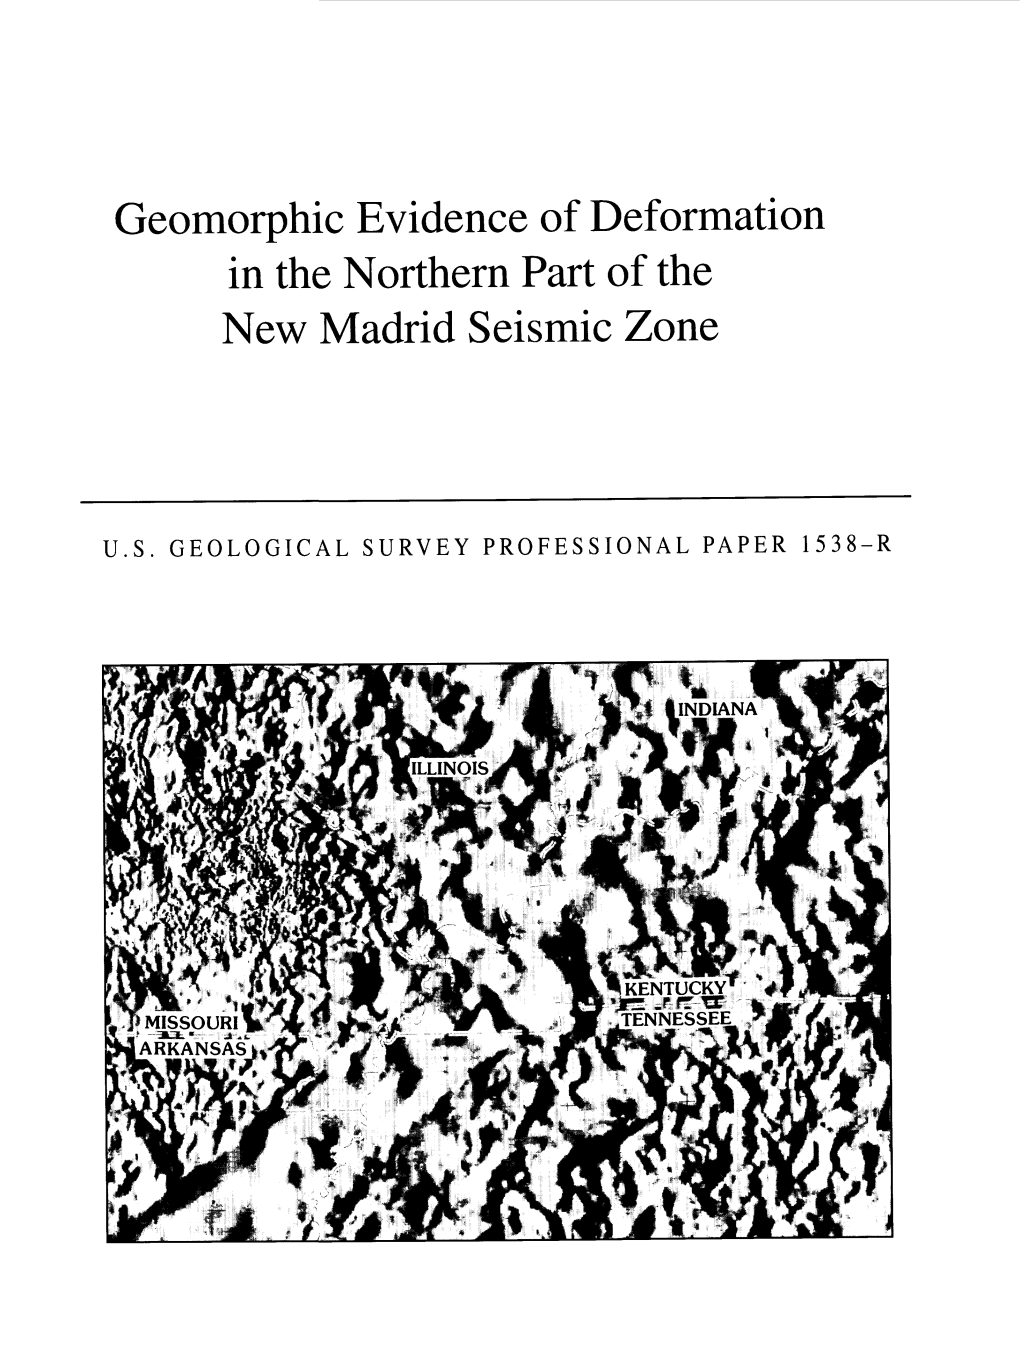 Geomorphic Evidence of Deformation in the Northern Part of the New Madrid Seismic Zone